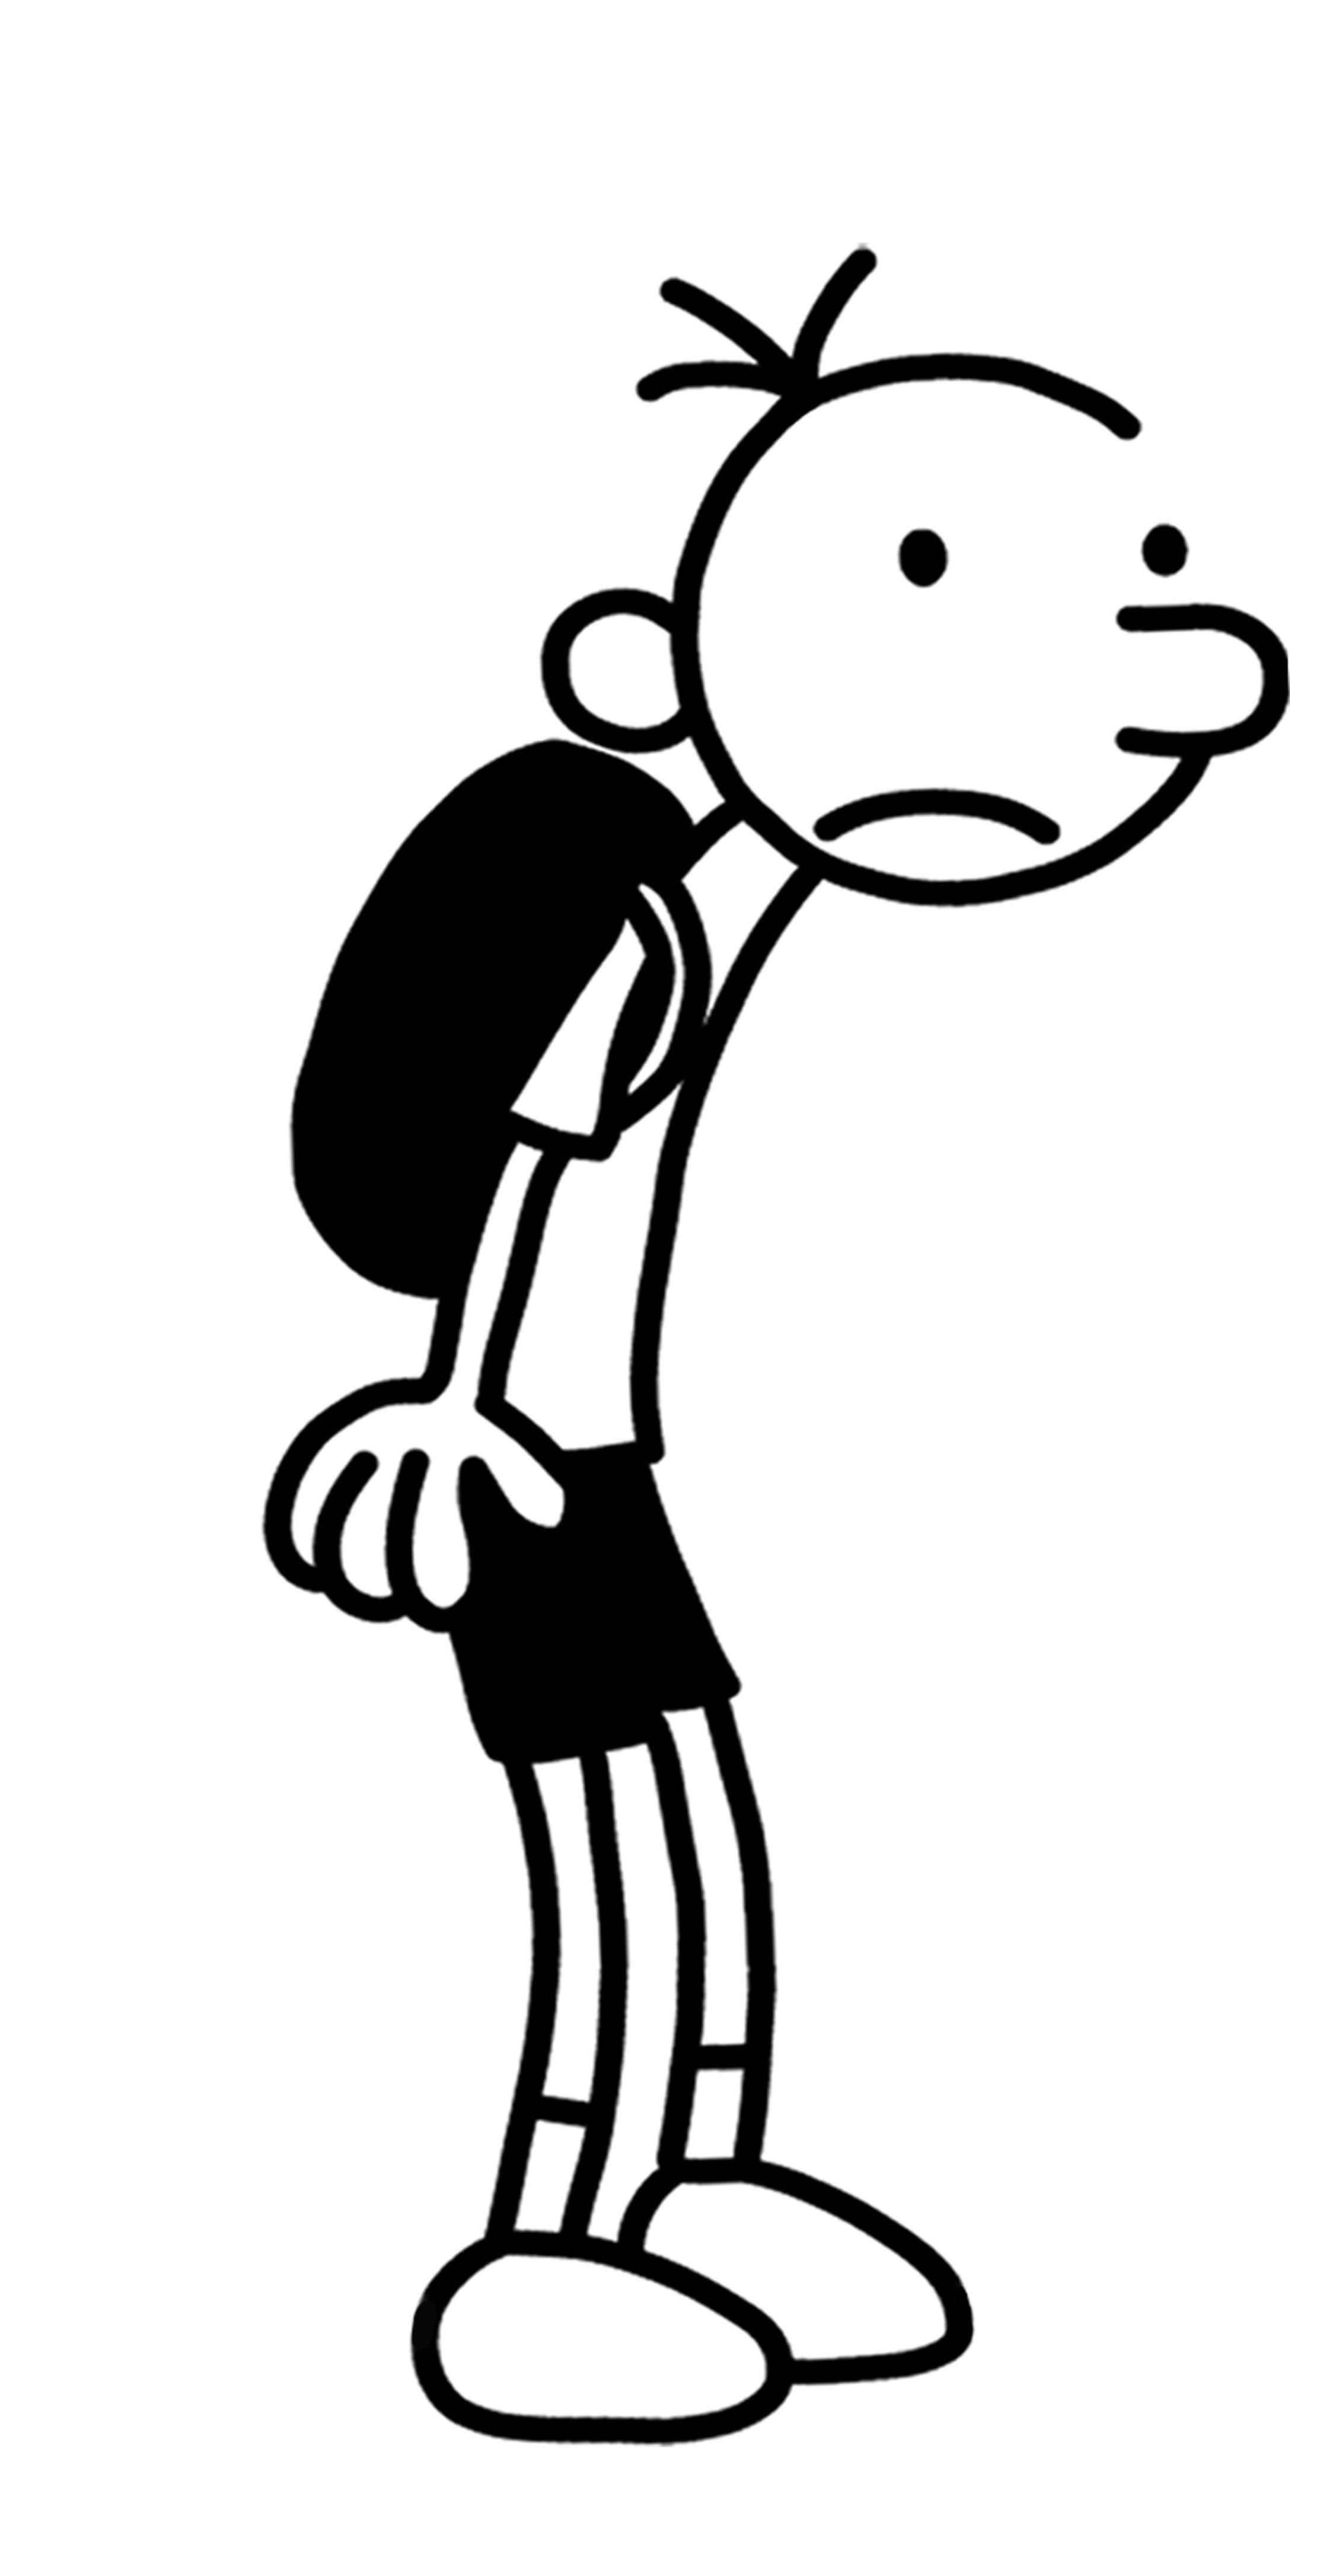 Ideal Diary A Wimpy Kid Coloring Pages Picture All For You